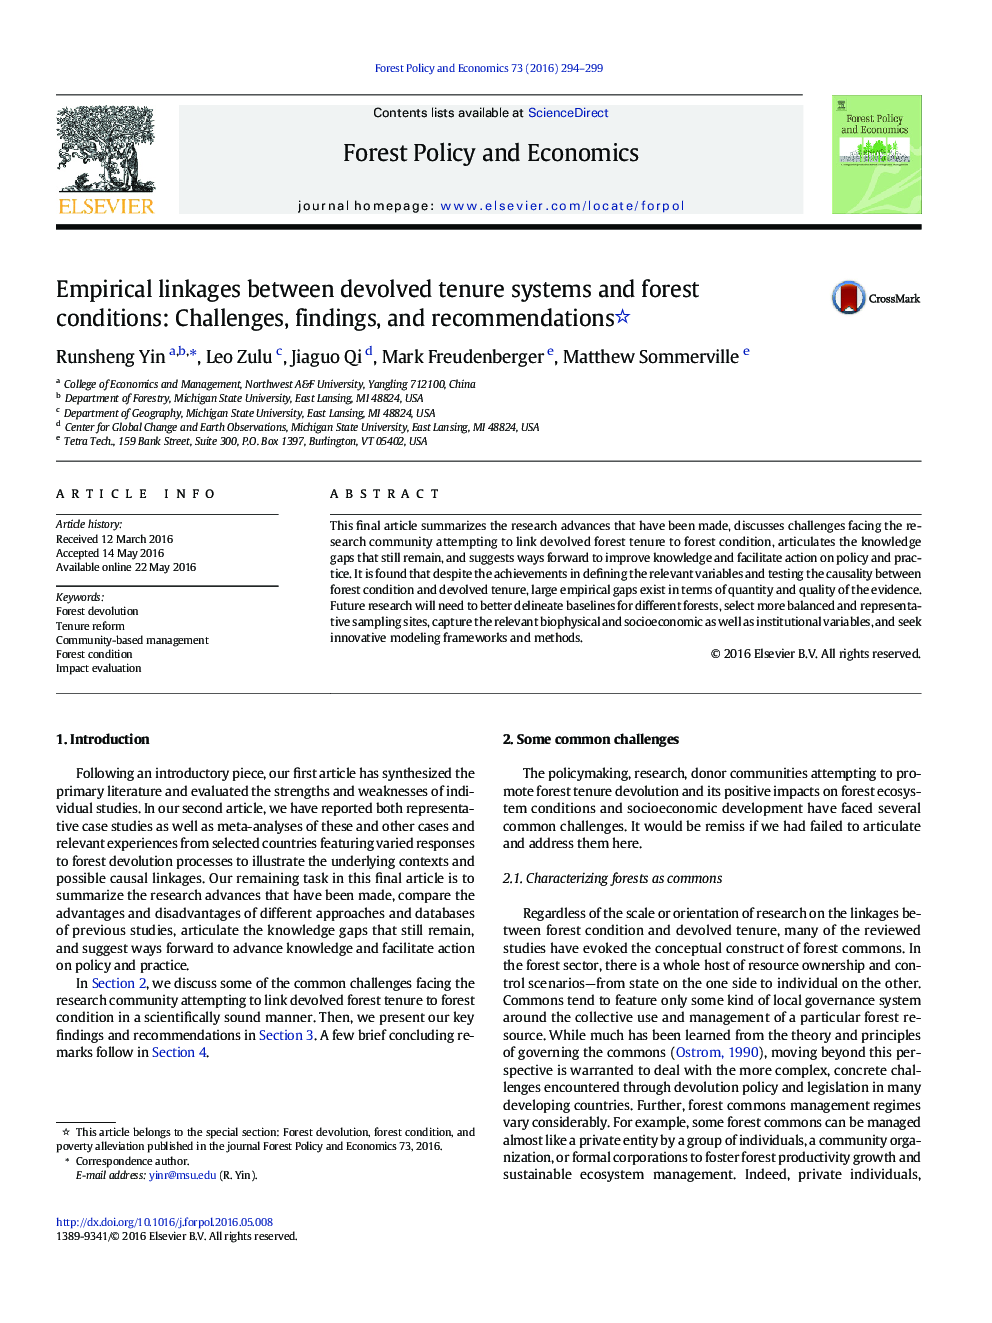 Empirical linkages between devolved tenure systems and forest conditions: Challenges, findings, and recommendations